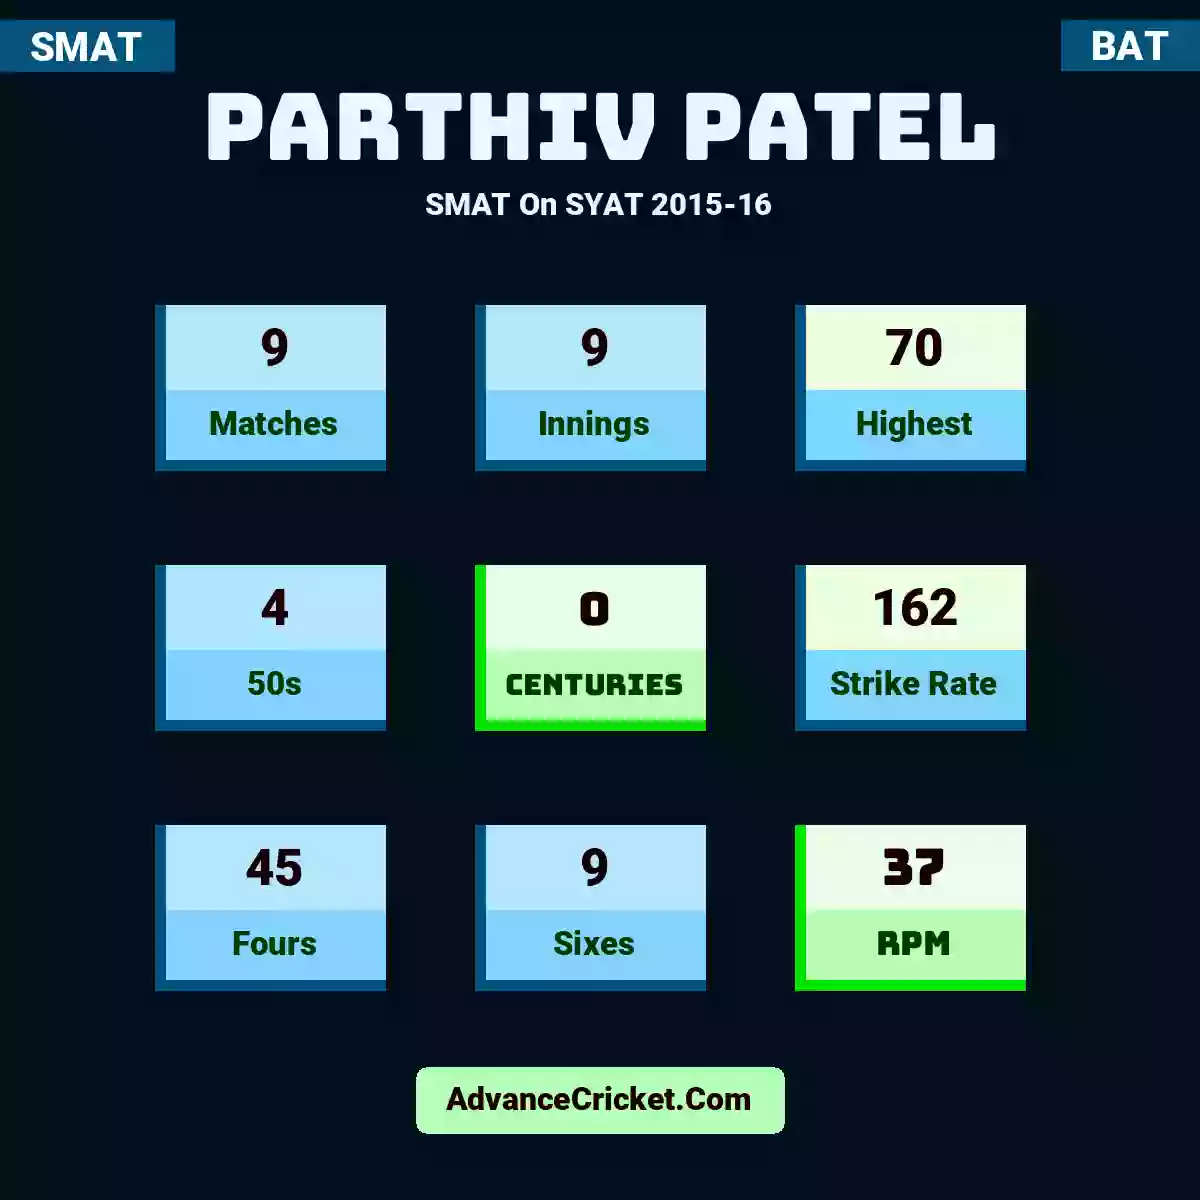 Parthiv Patel SMAT  On SYAT 2015-16, Parthiv Patel played 9 matches, scored 70 runs as highest, 4 half-centuries, and 0 centuries, with a strike rate of 162. P.Patel hit 45 fours and 9 sixes, with an RPM of 37.